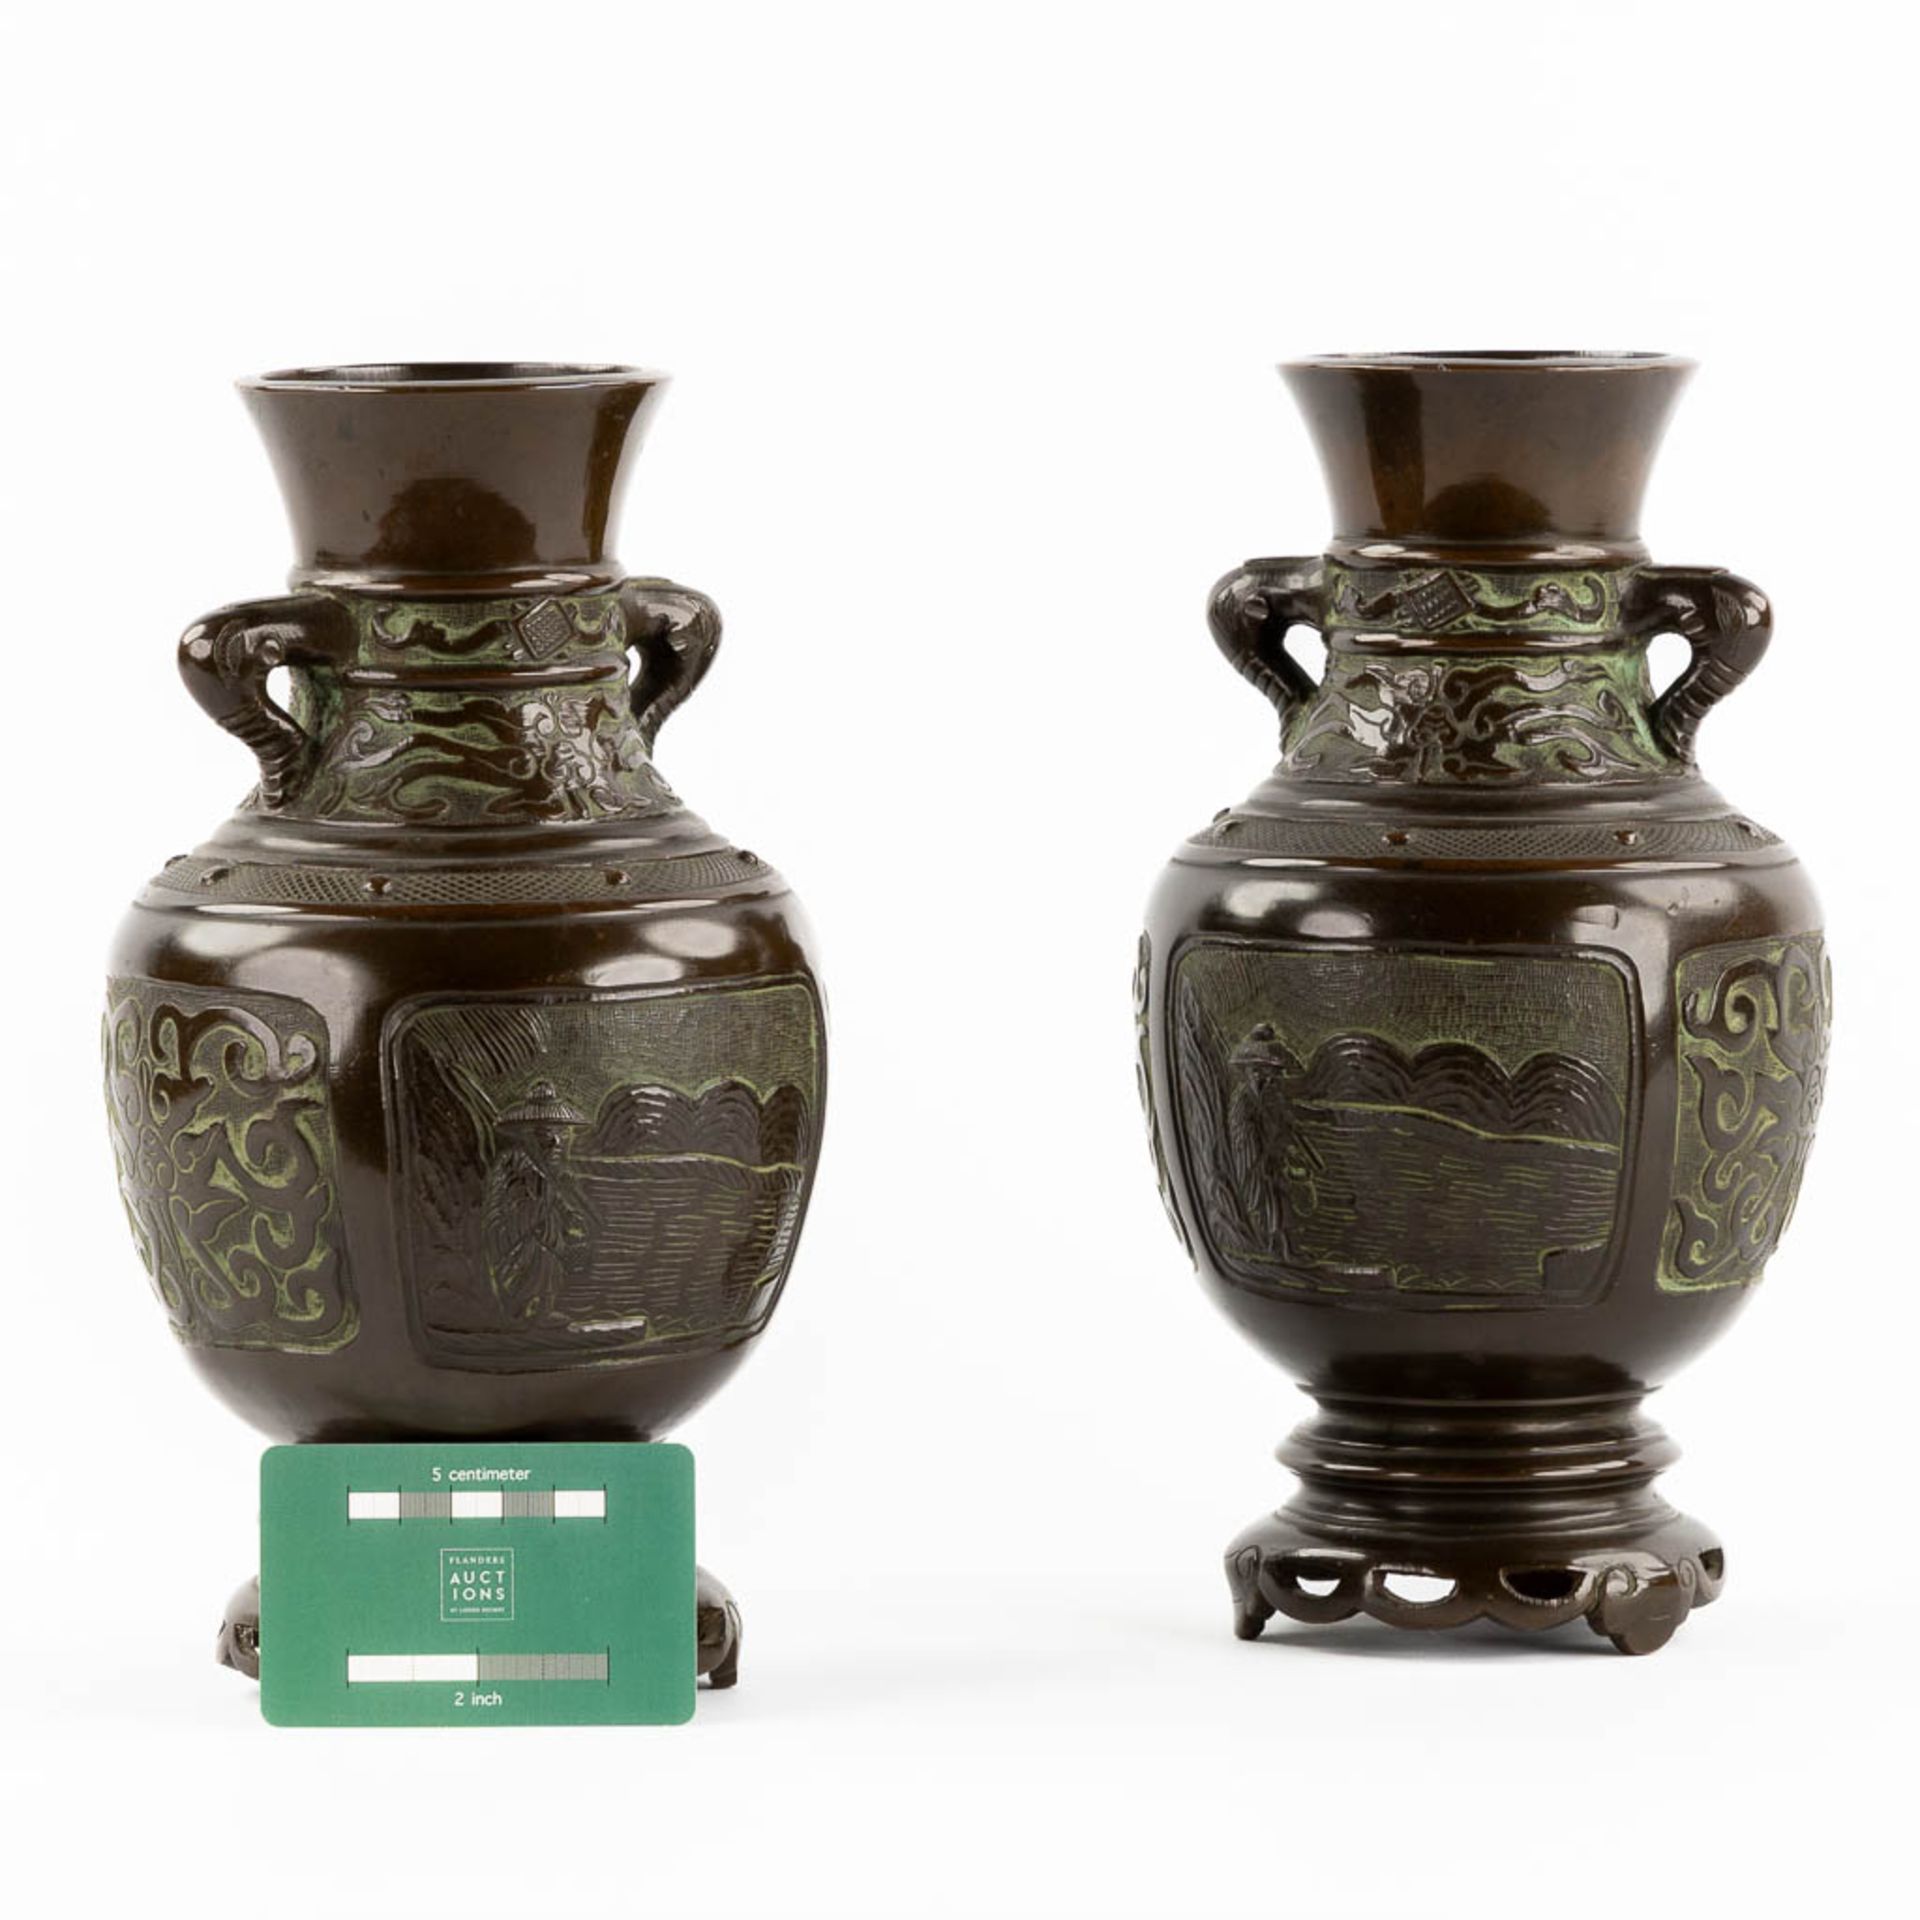 A pair of Japanese vases, patinated bronze. 19th C. (H:26 x D:14 cm) - Image 2 of 11